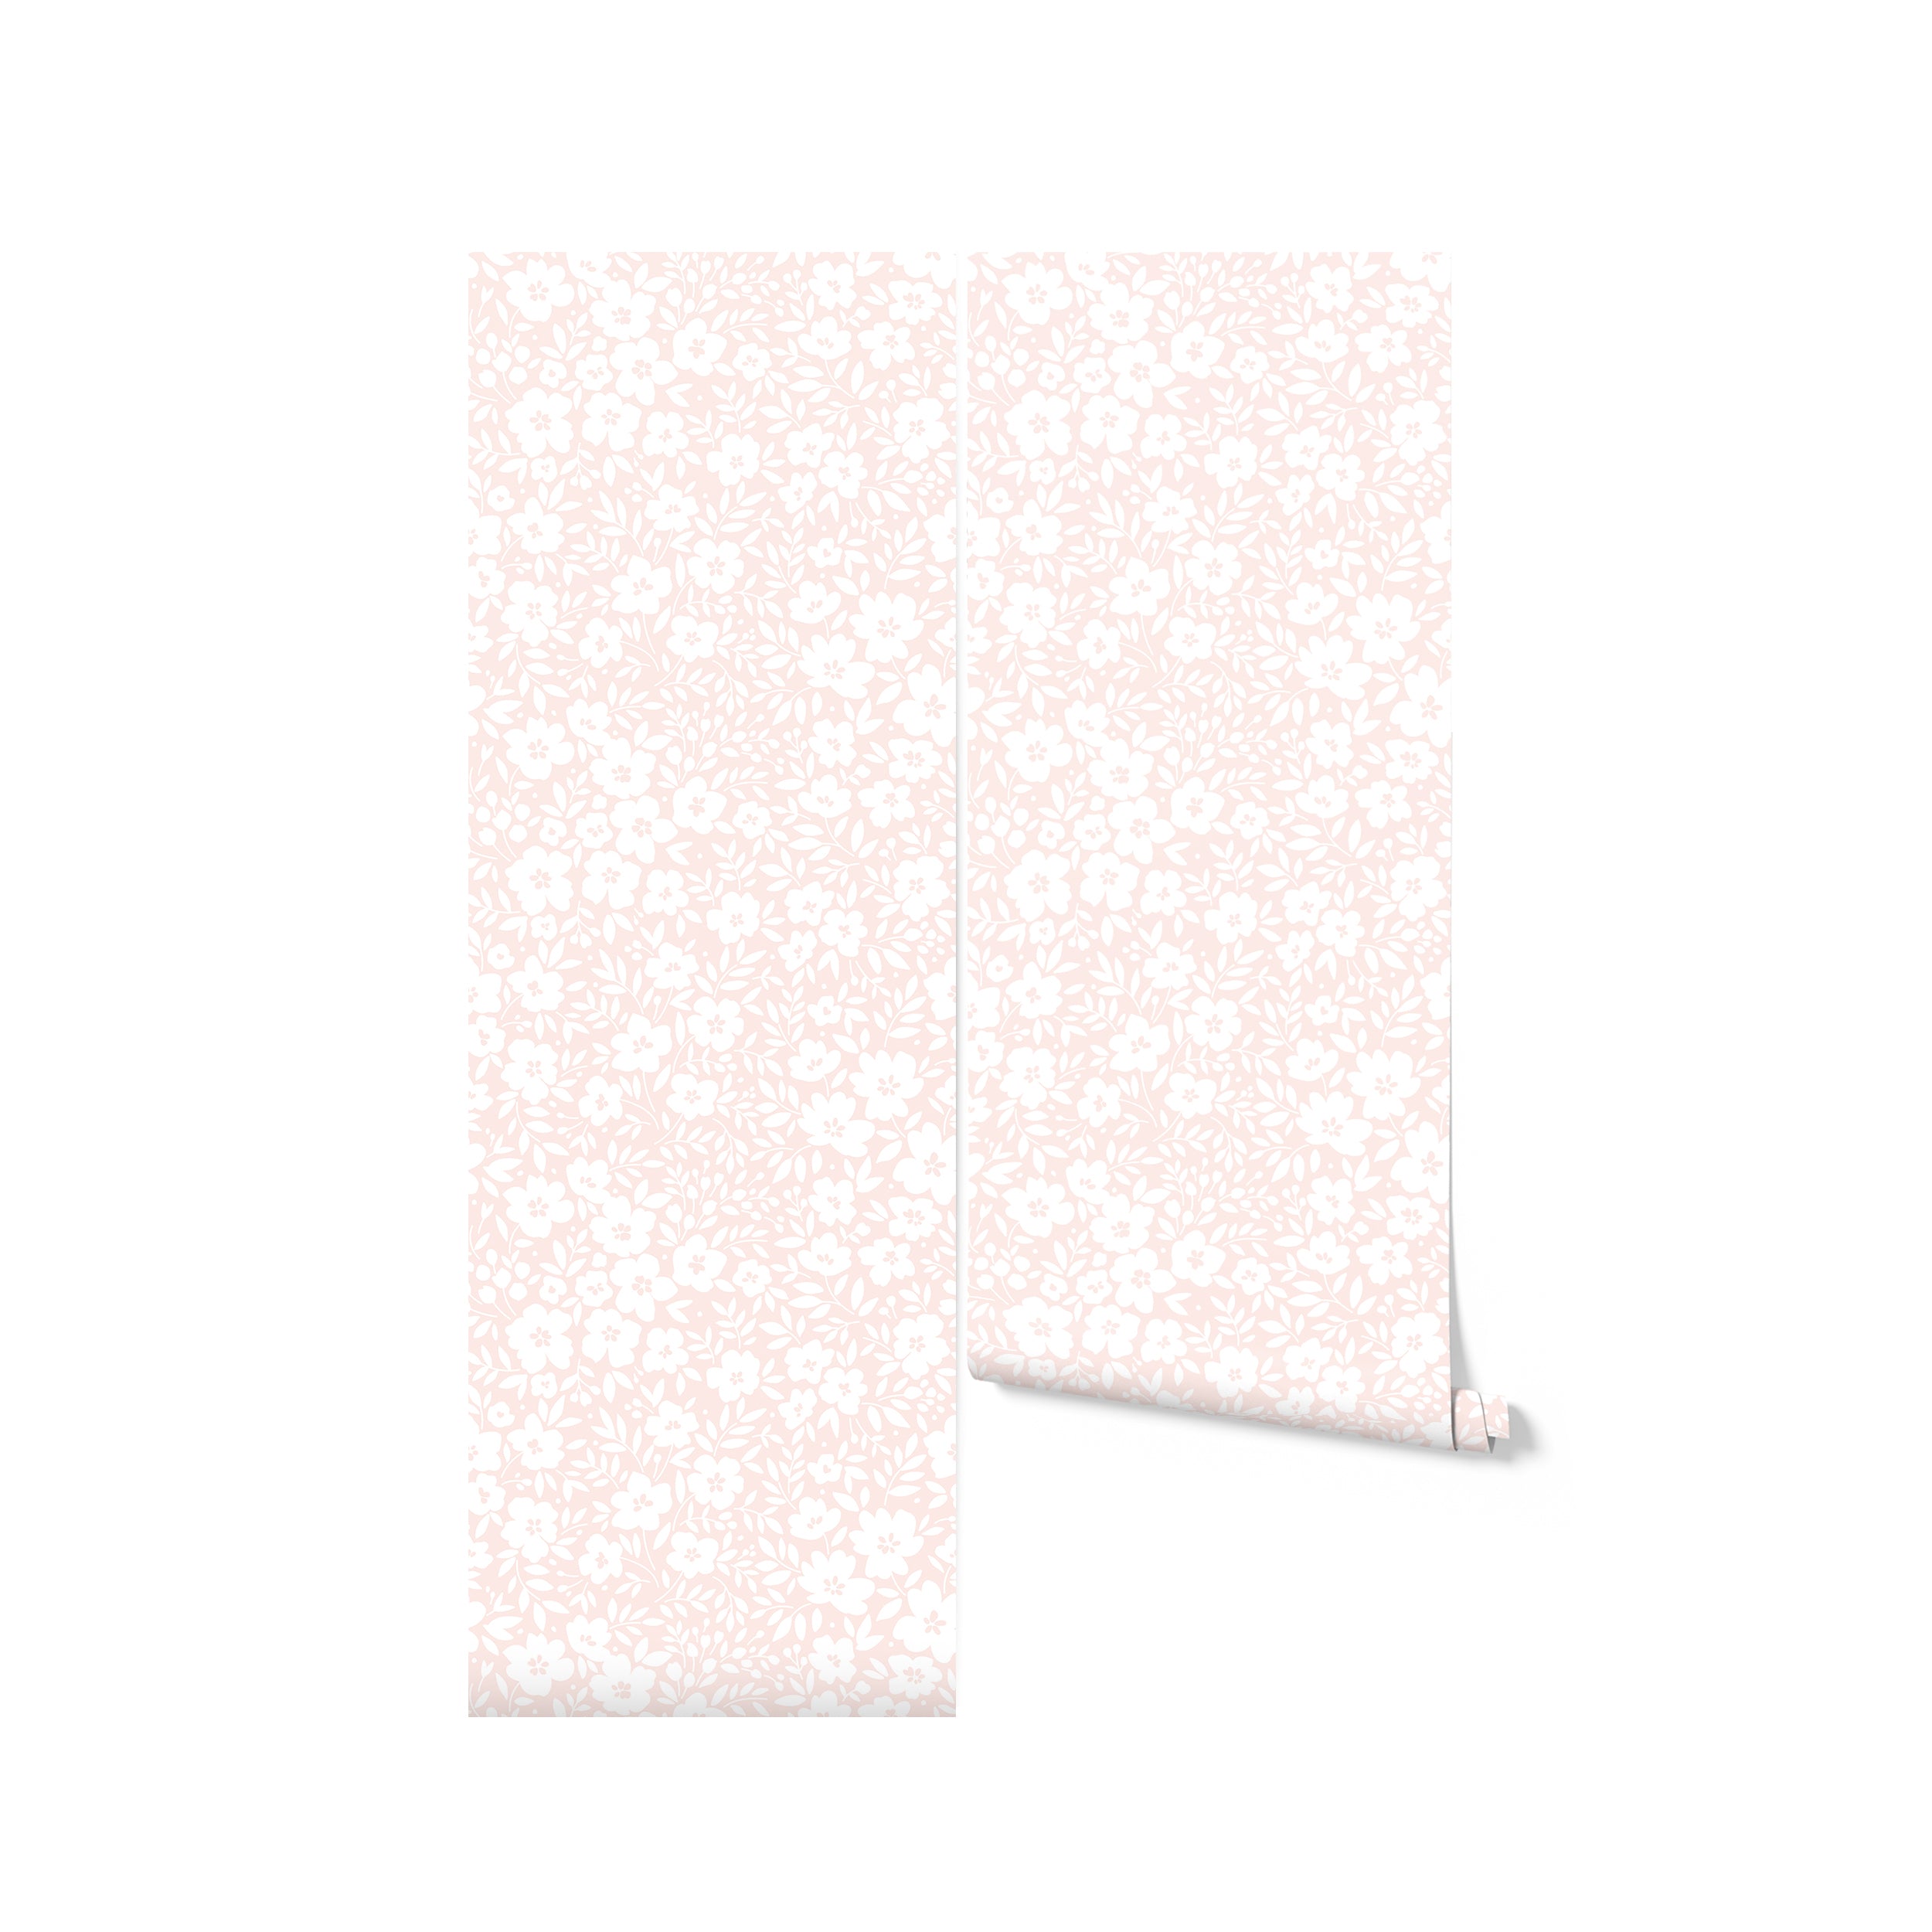 A roll of Flower Power Wallpaper, highlighting the charming pink floral pattern. This image showcases the wallpaper's design and texture, ideal for buyers looking to add a subtle yet impactful decor element to their space.